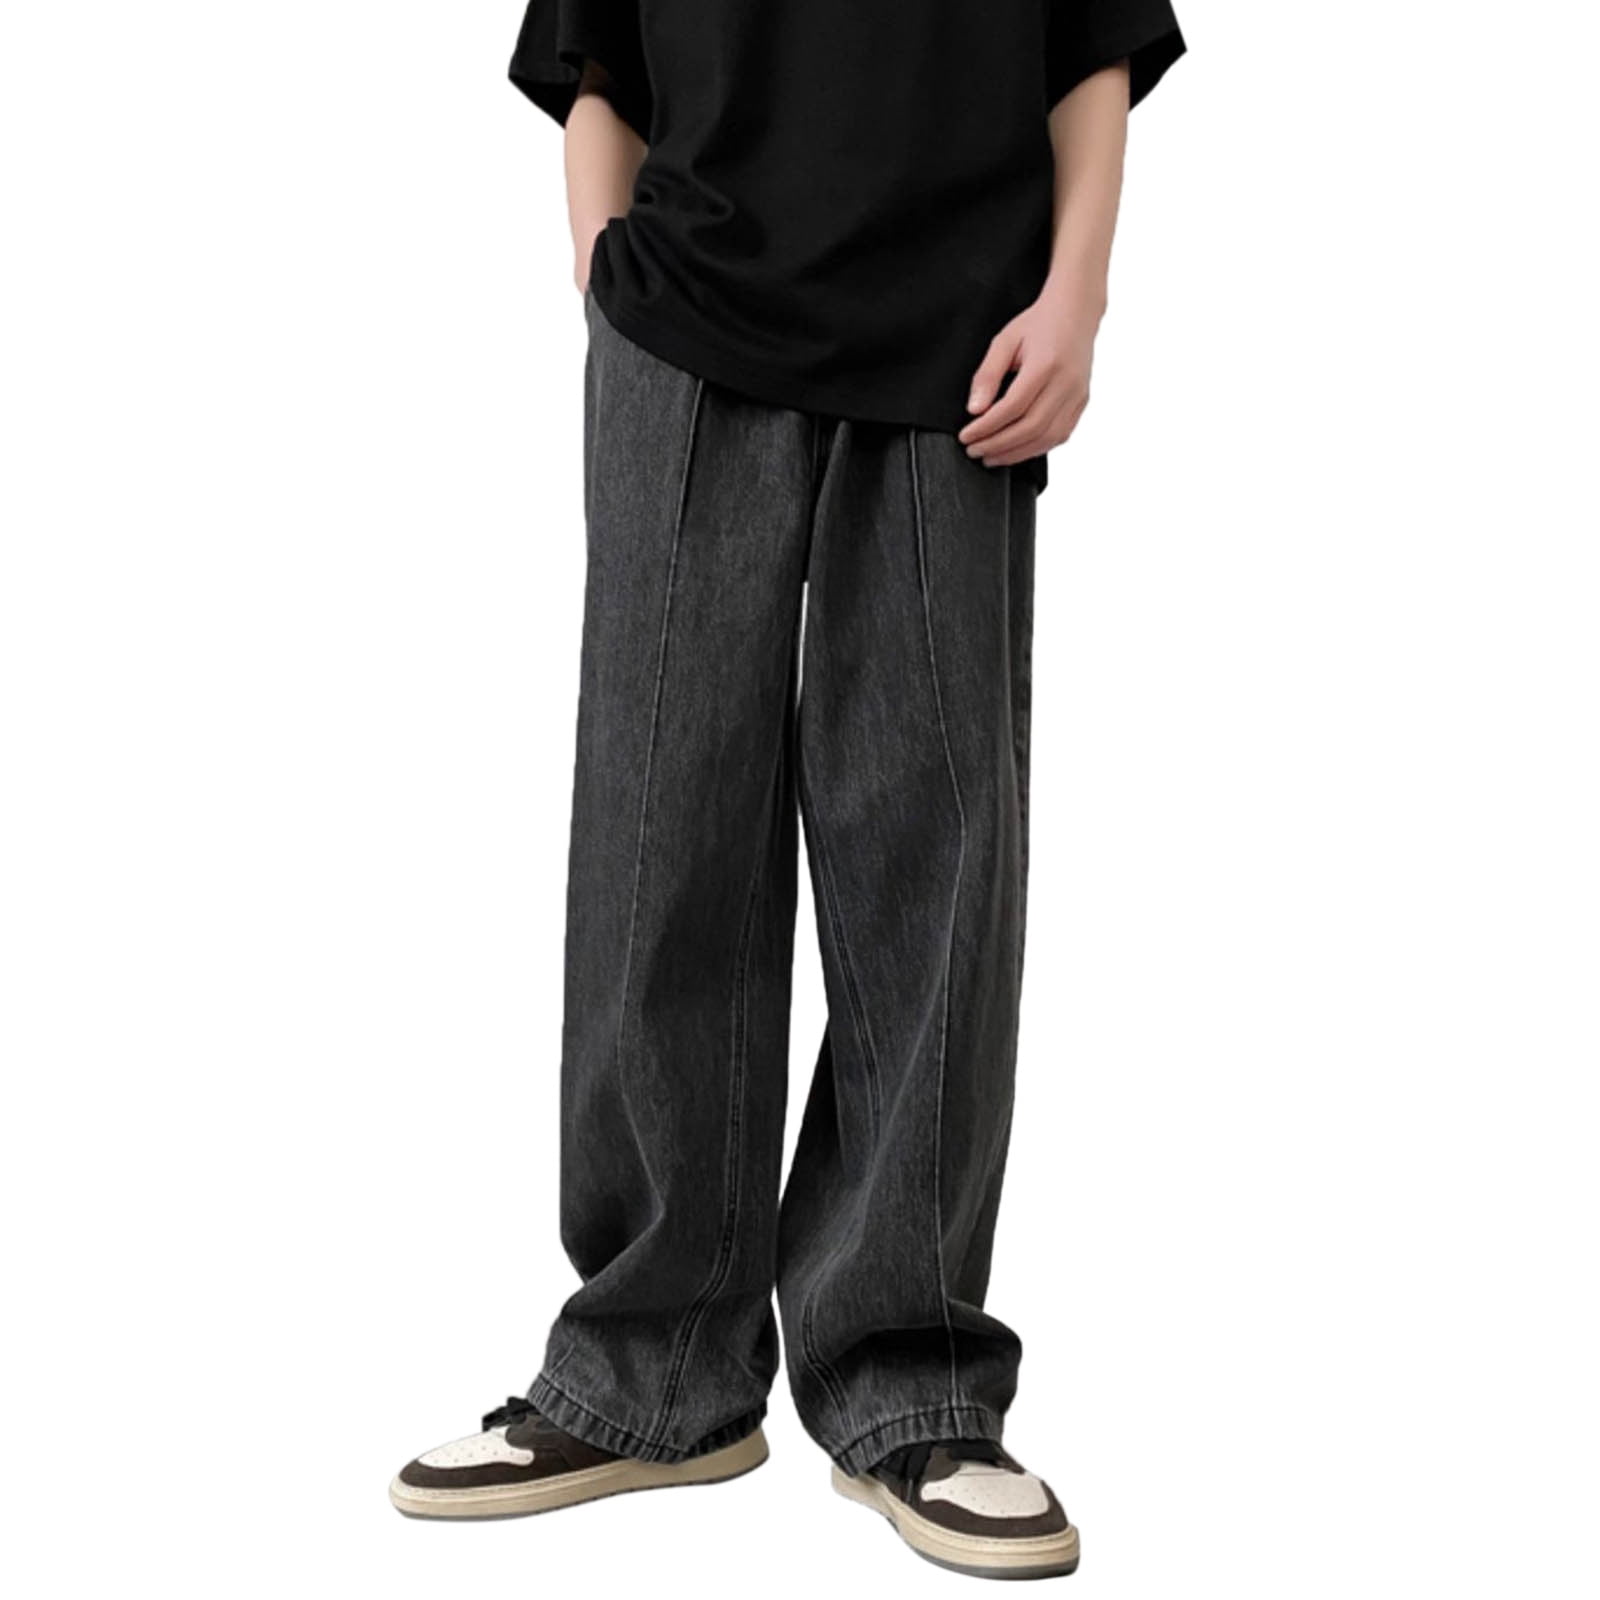 TAIAOJING Men's Baggy Cargo Pants with Pockets Fashion Loose Plus Size ...